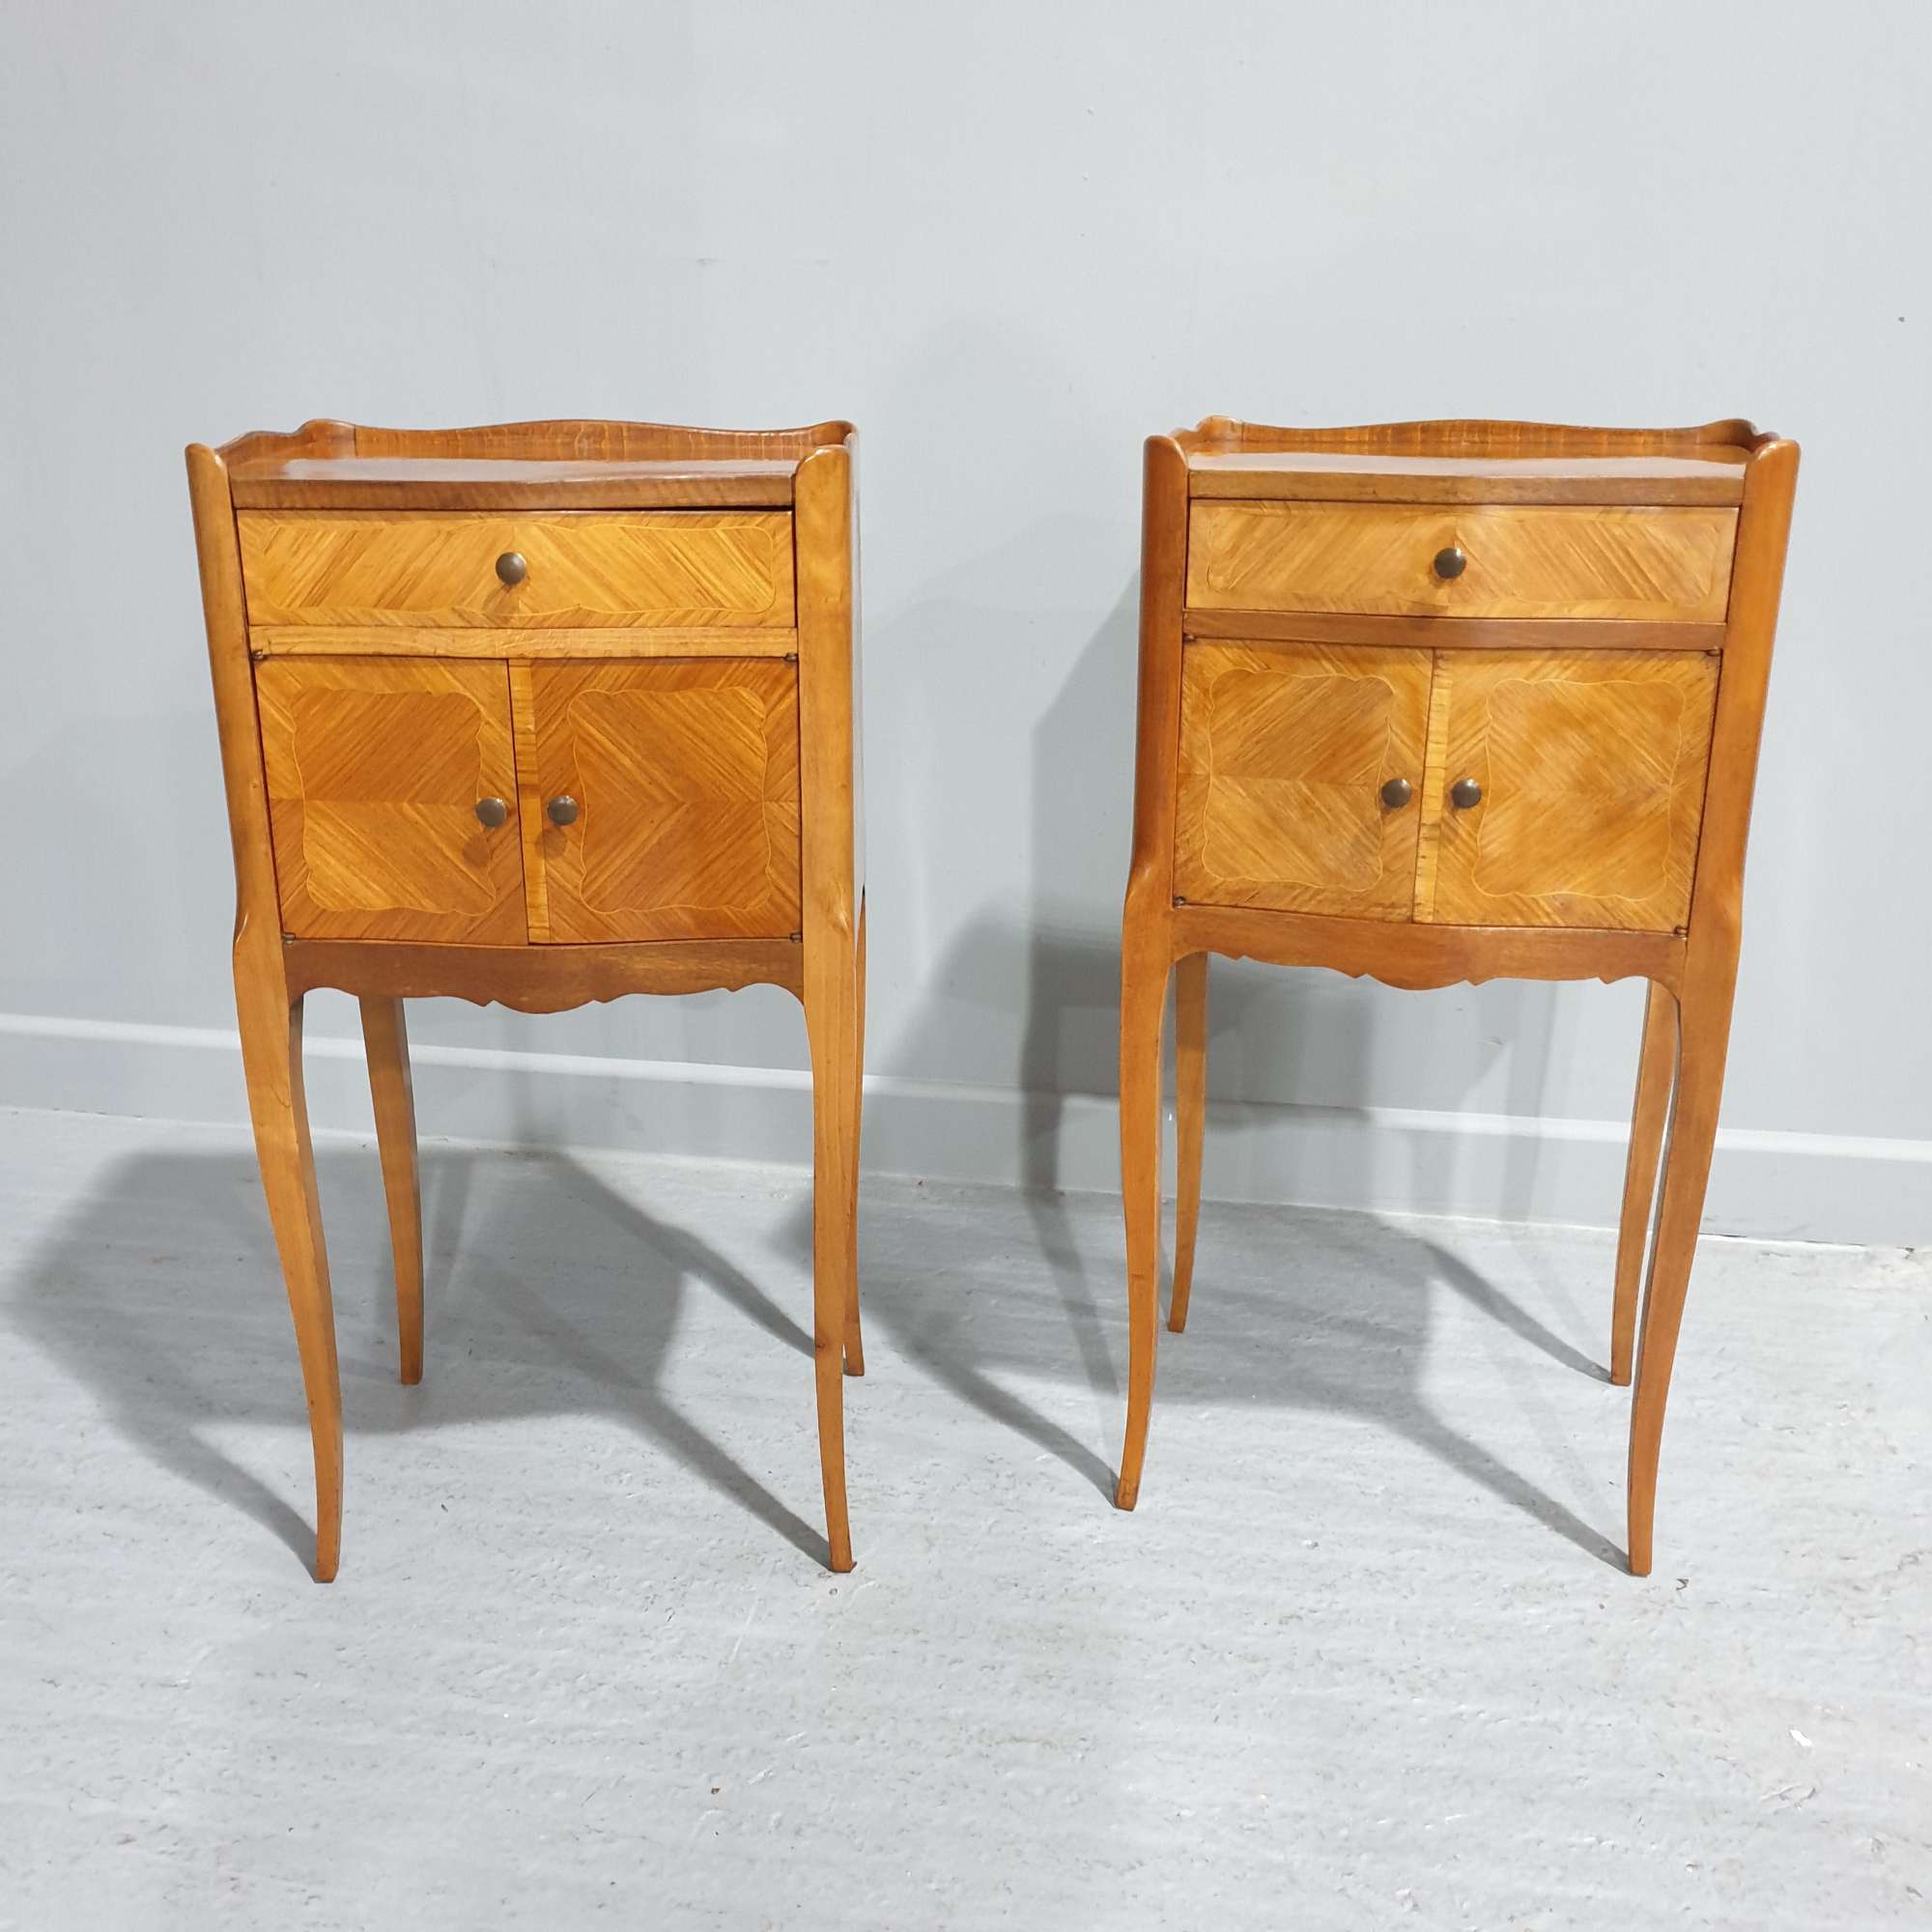 Superb Pair French Marquetry Bedside Lamp Cabinets